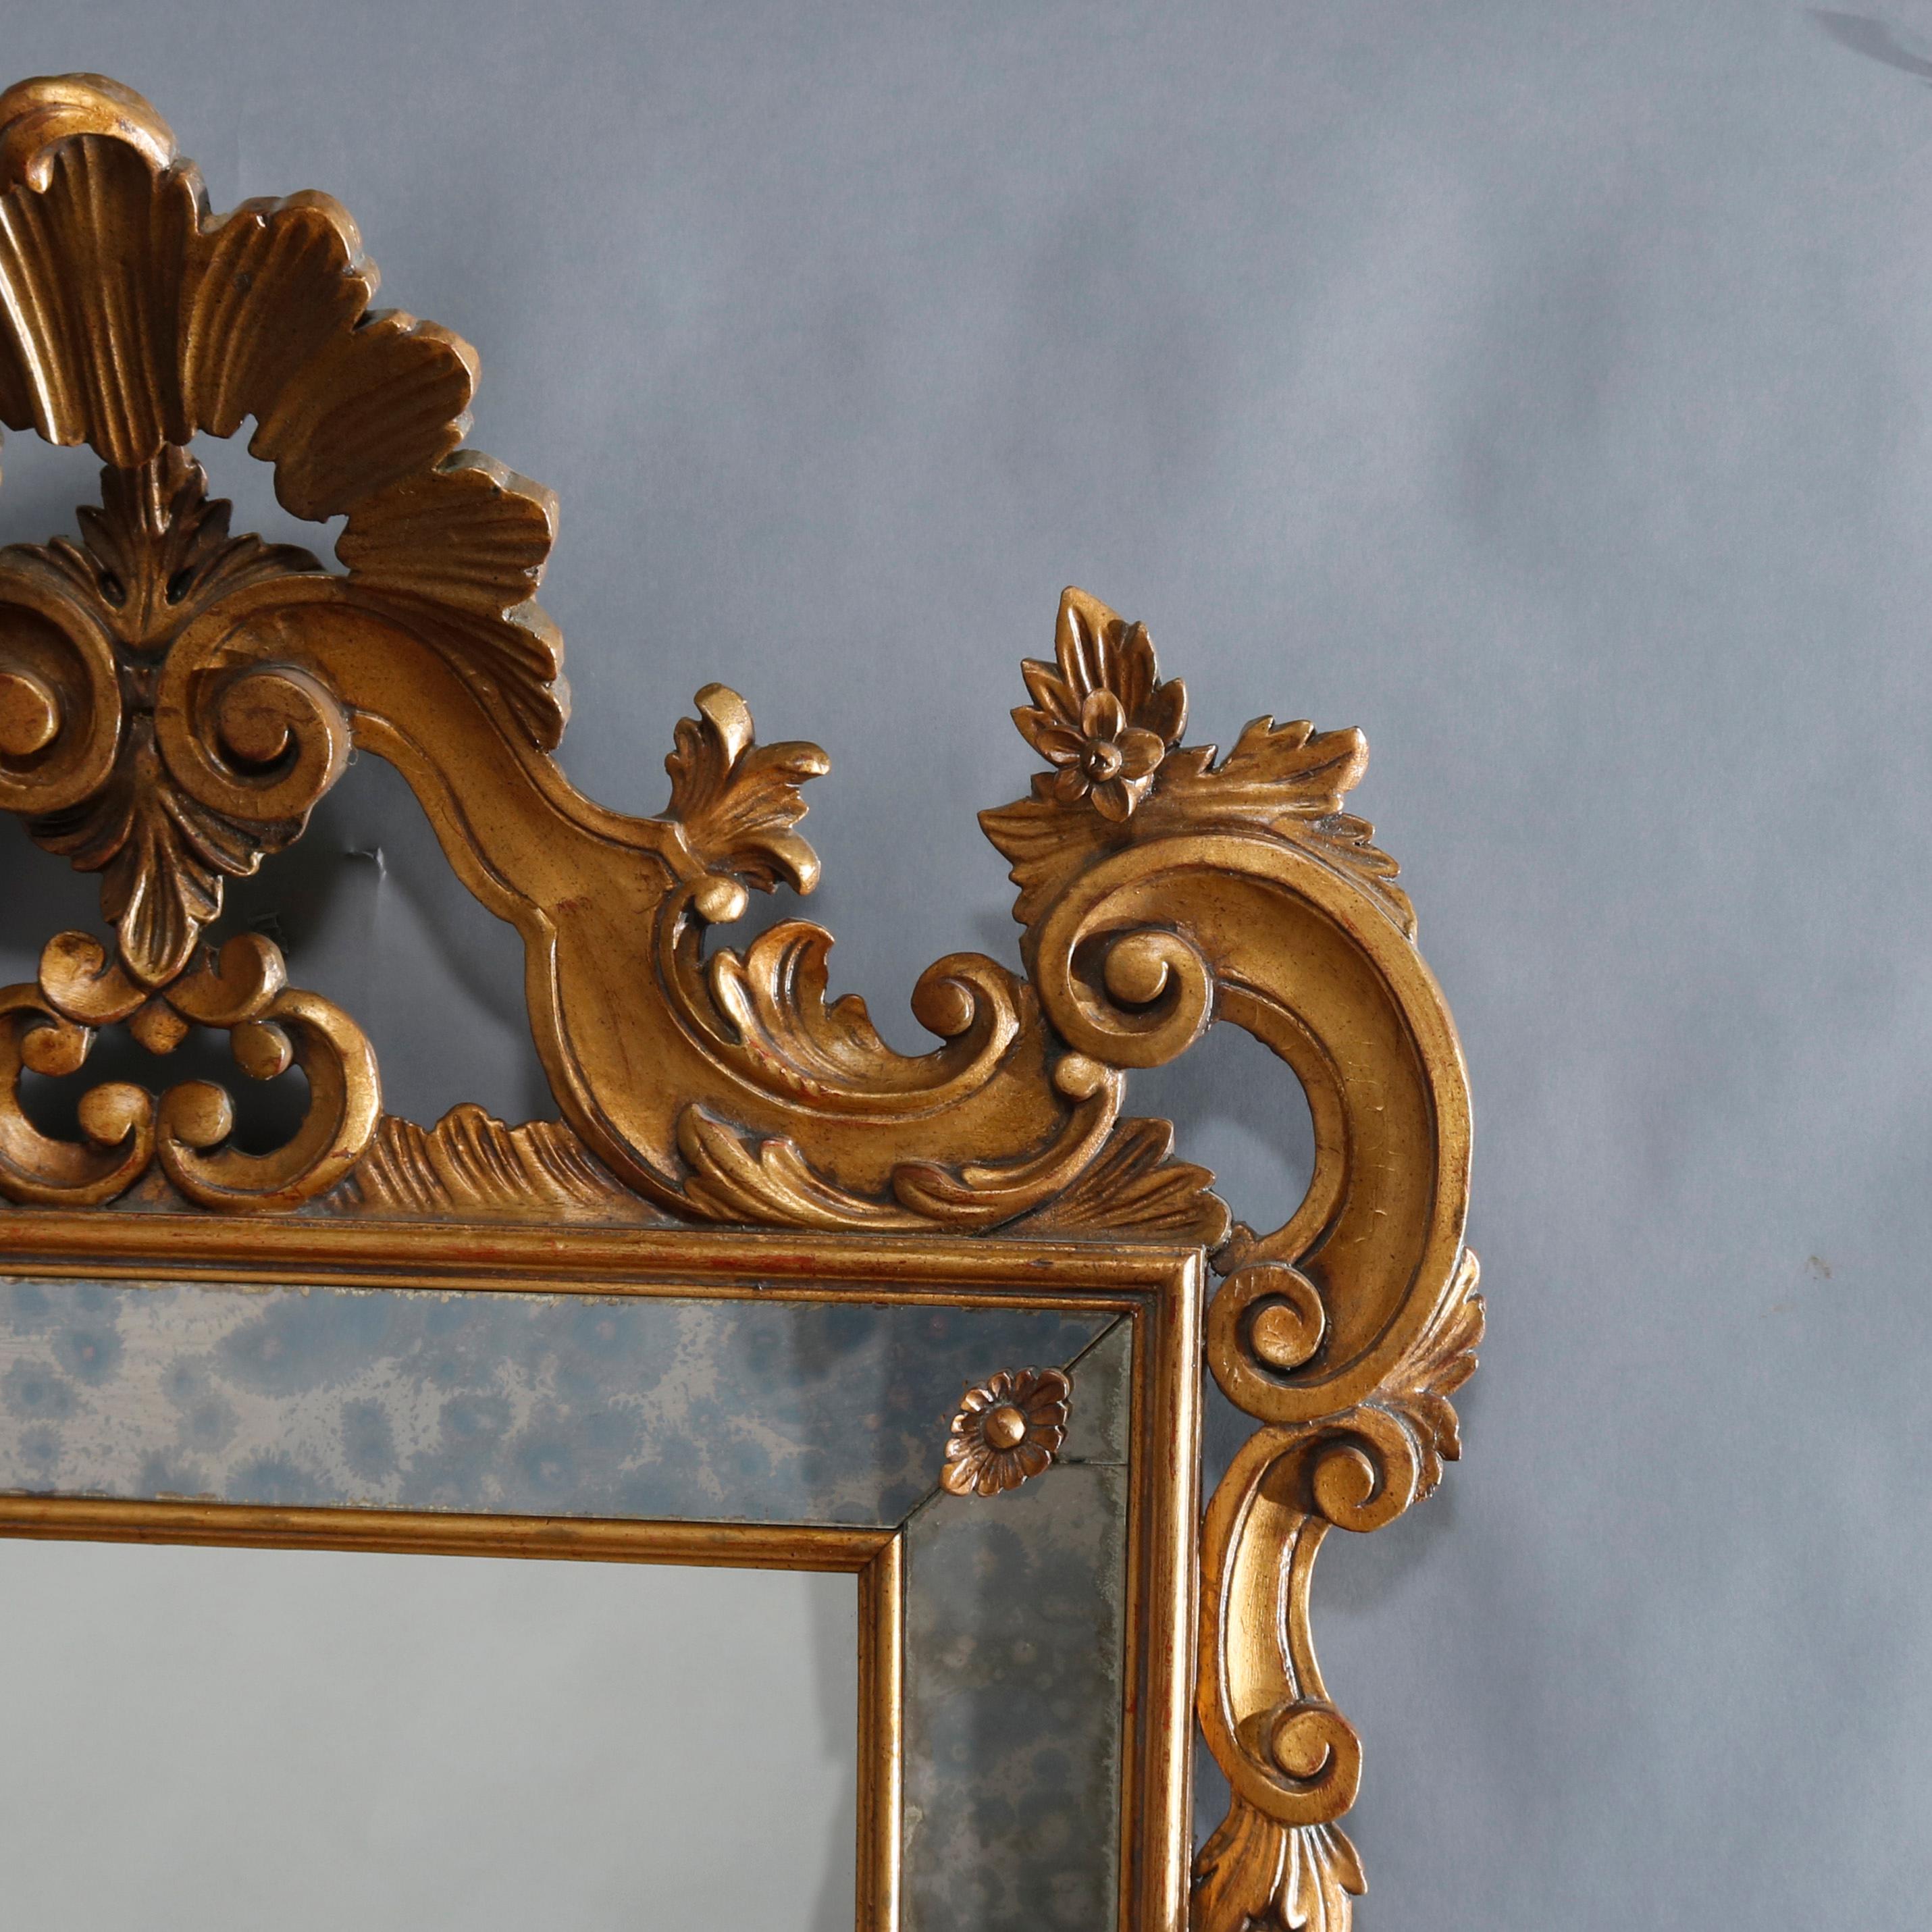 Vintage Italian Rococo Style Giltwood Parclose Over Mantel Mirror by Karges 1